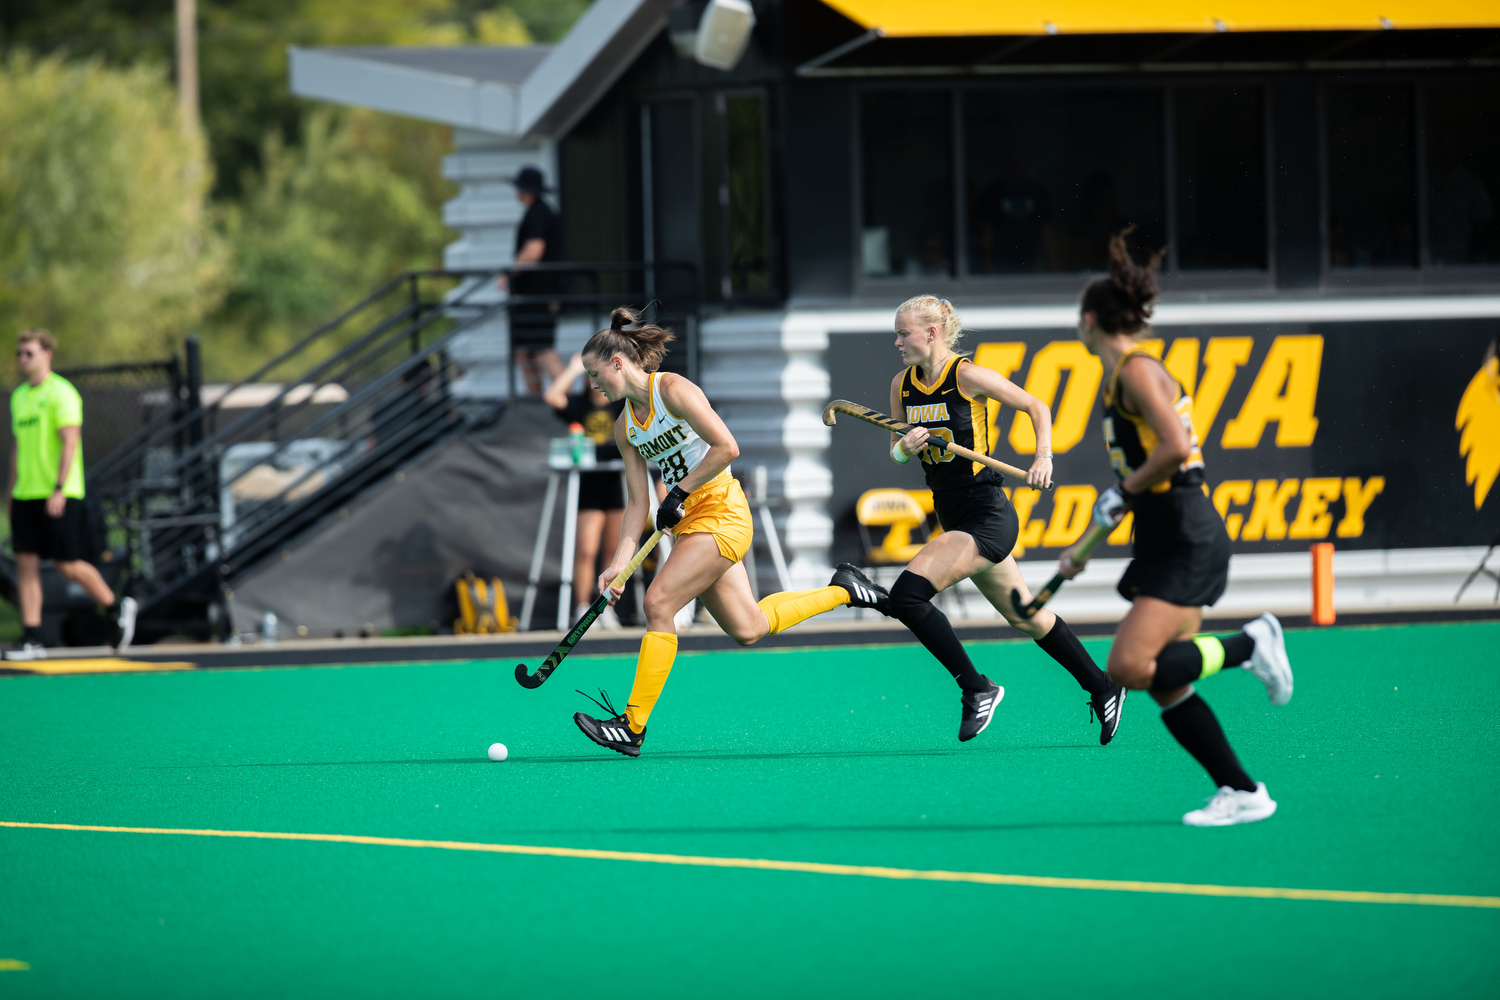 Vermont forward Alina Gerke (28) races with the ball down the field while Iowa midfielder Dionne van Aalsum chases her during the game against the Iowa Hawkeyes at Grant Field in Iowa City on Sept. 15, 2023. The Hawkeyes defeated the Catamounts 5-0.